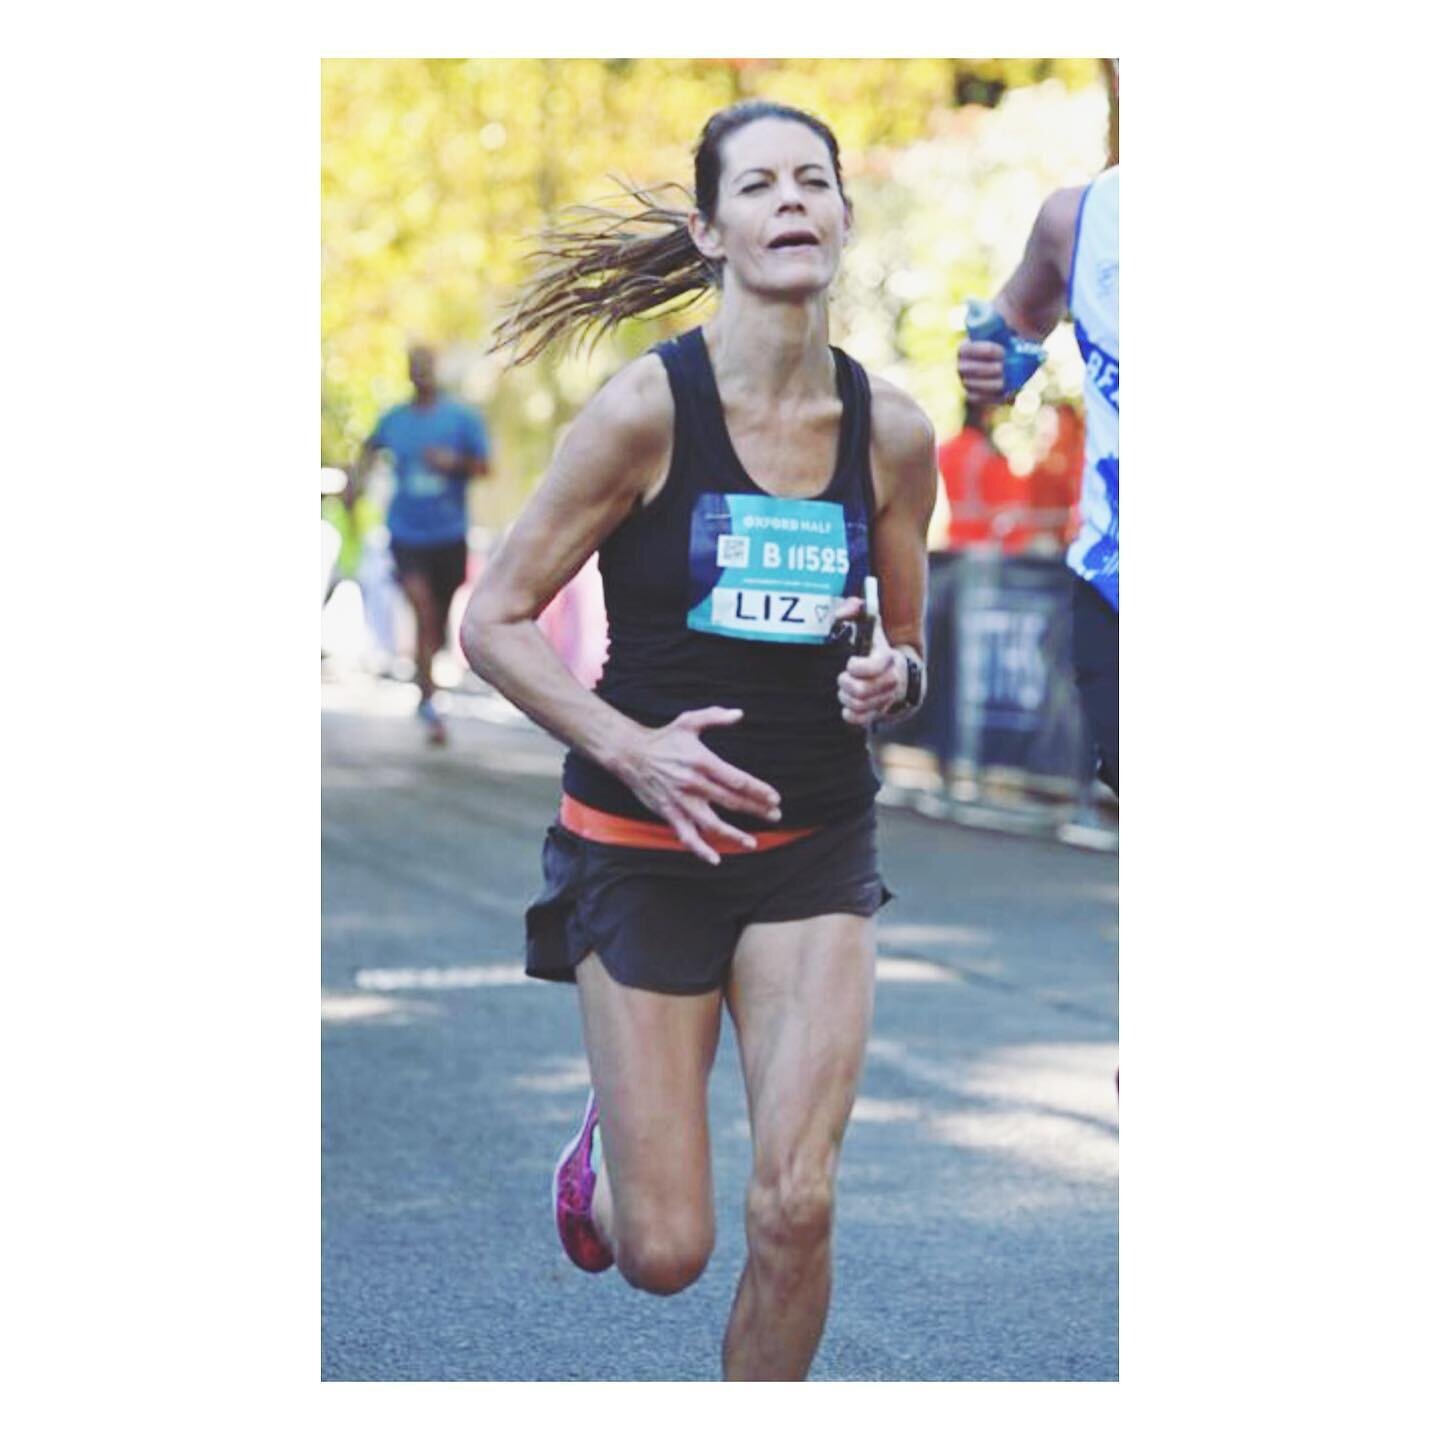 Race running is not meant to be pretty.
It's meant to be HARD.
Everything you've got.
Everything you can give.

It's a fight against the clock, and against everything our mind and body is telling us: to STOP.

This was the moment a few yards from the